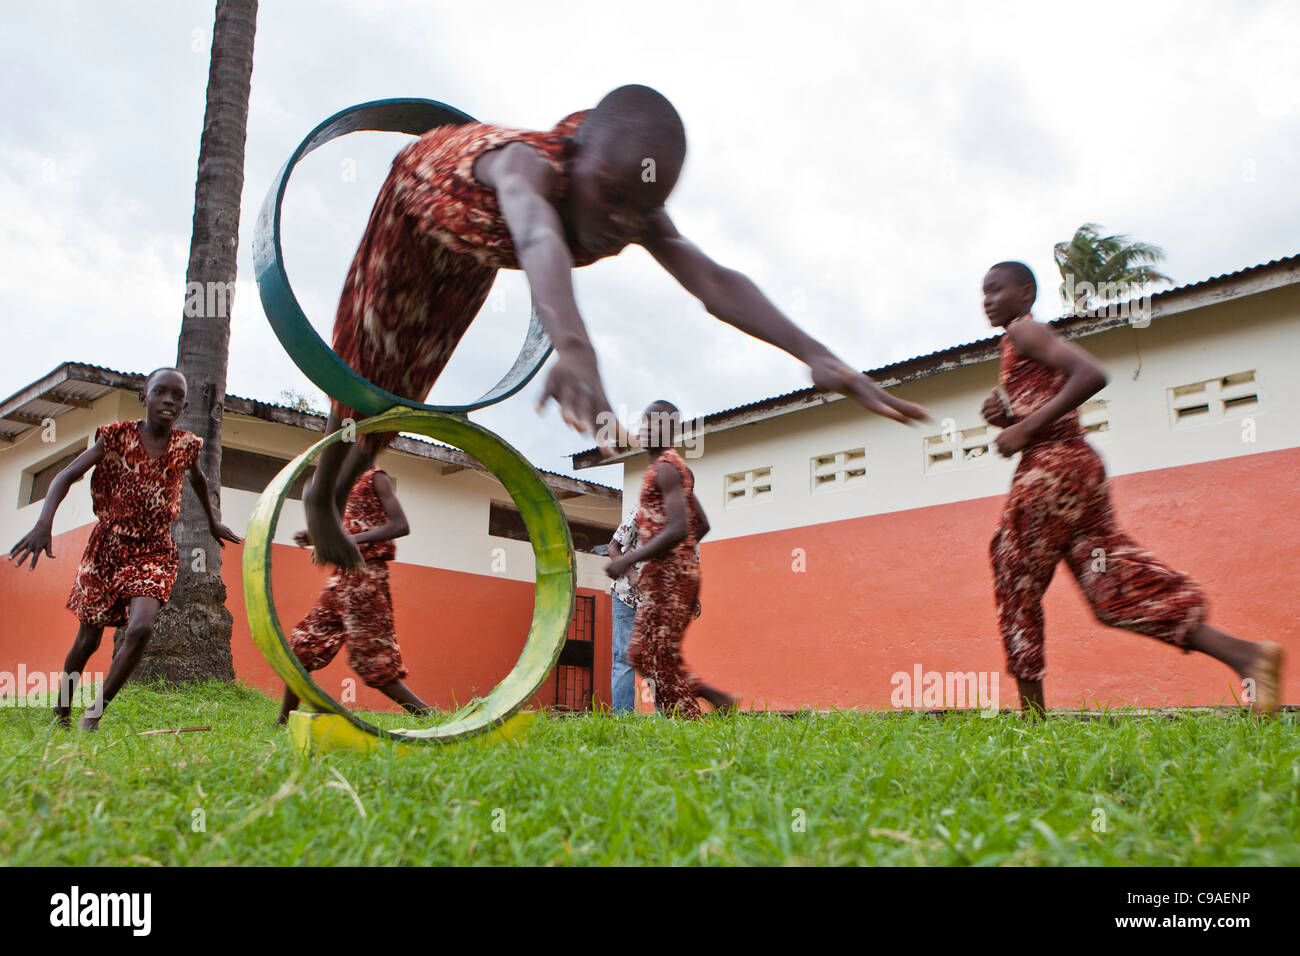 Boys at the Wema centre in Mombassa practice and perform acrobatics as part of their rehabilitation program. Stock Photo